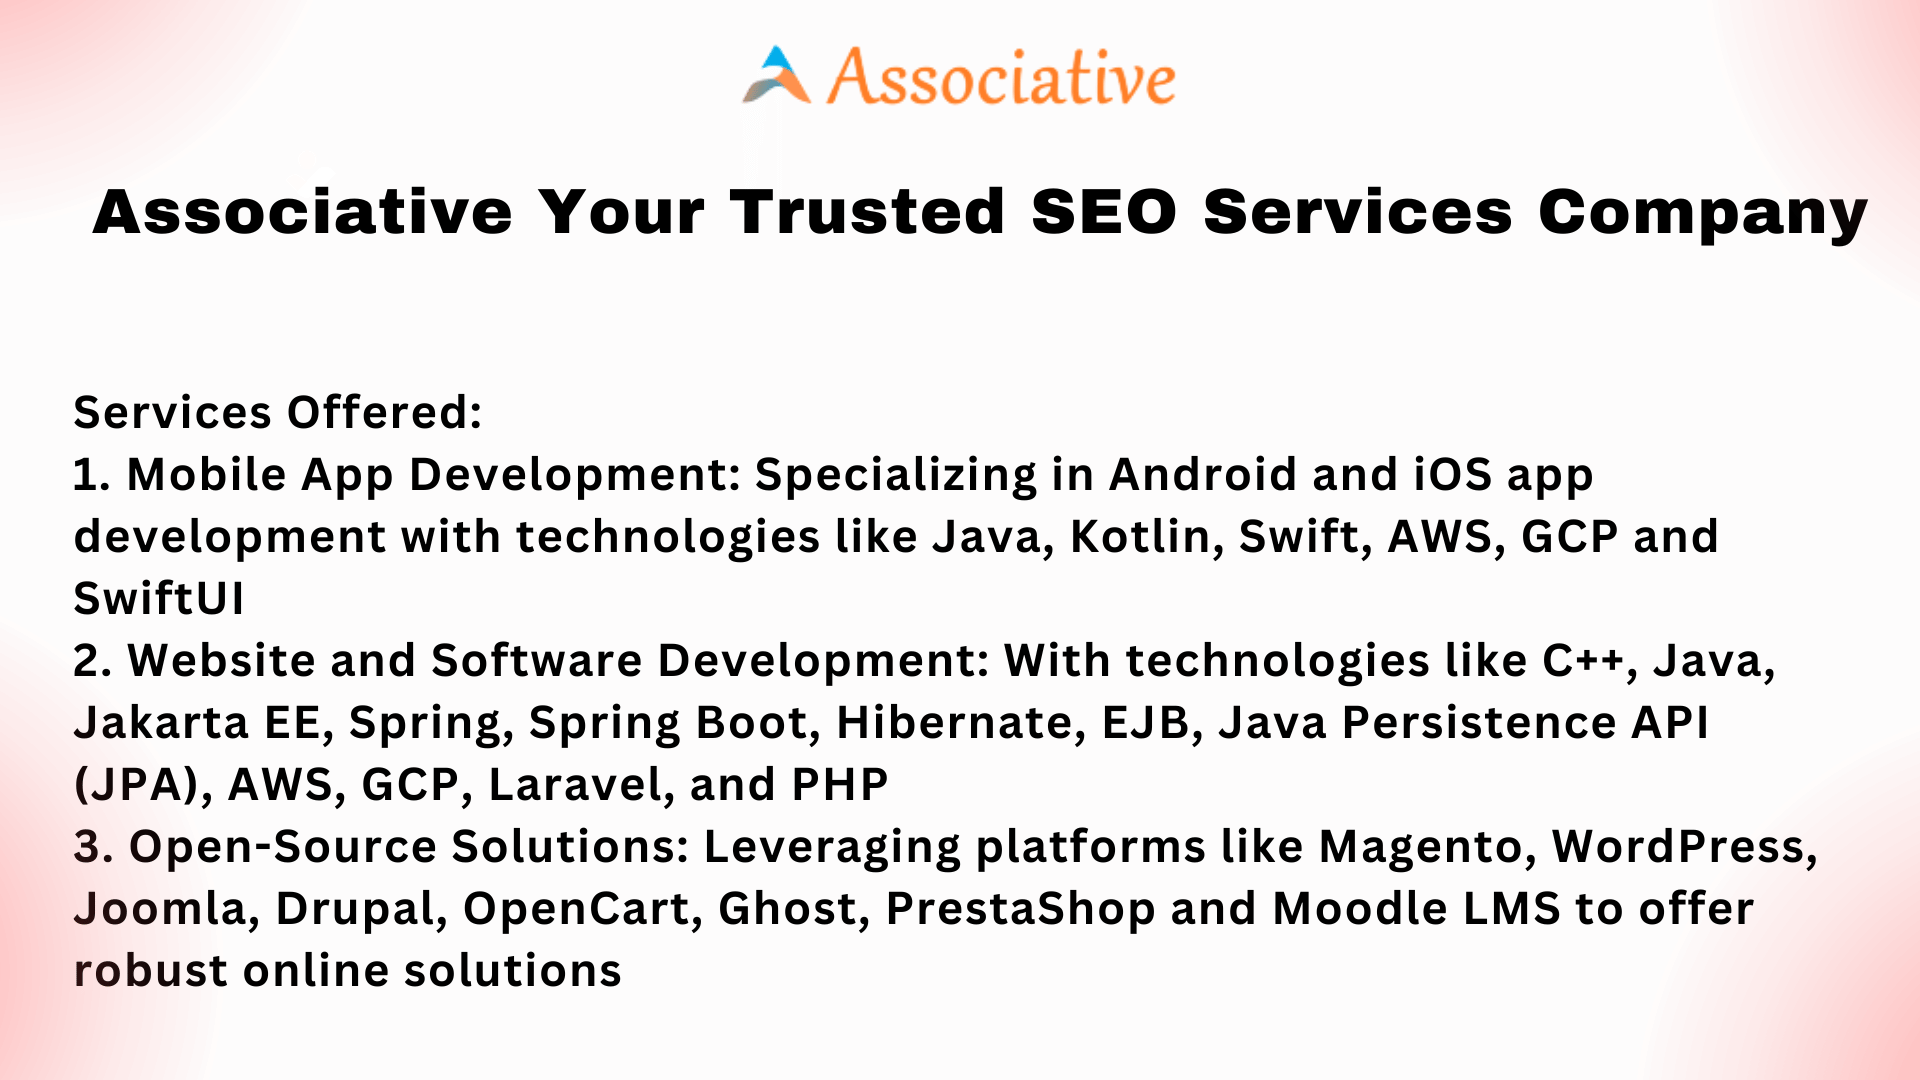 Associative Your Trusted SEO Services Company